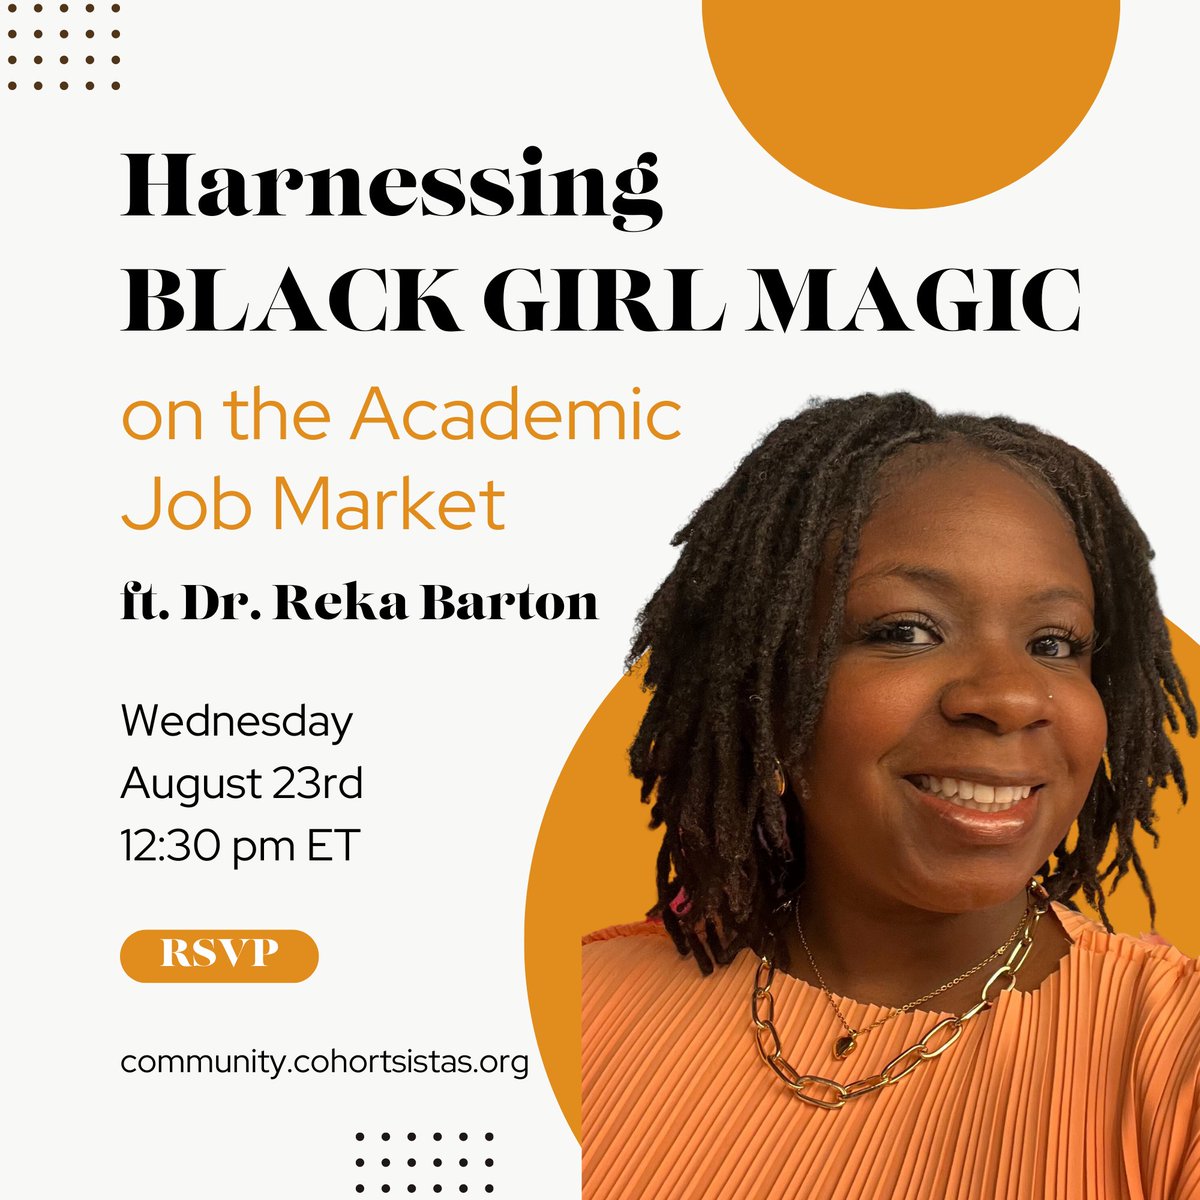 Interested in pursuing an academic job? Come hang out with us as we listen to @scholarlysewist Dr. Reka Barton dishing out her experience dealing with the academic job market as a Black woman, and she's got some awesome advice for anyone wanting to do the same!

#academicjob